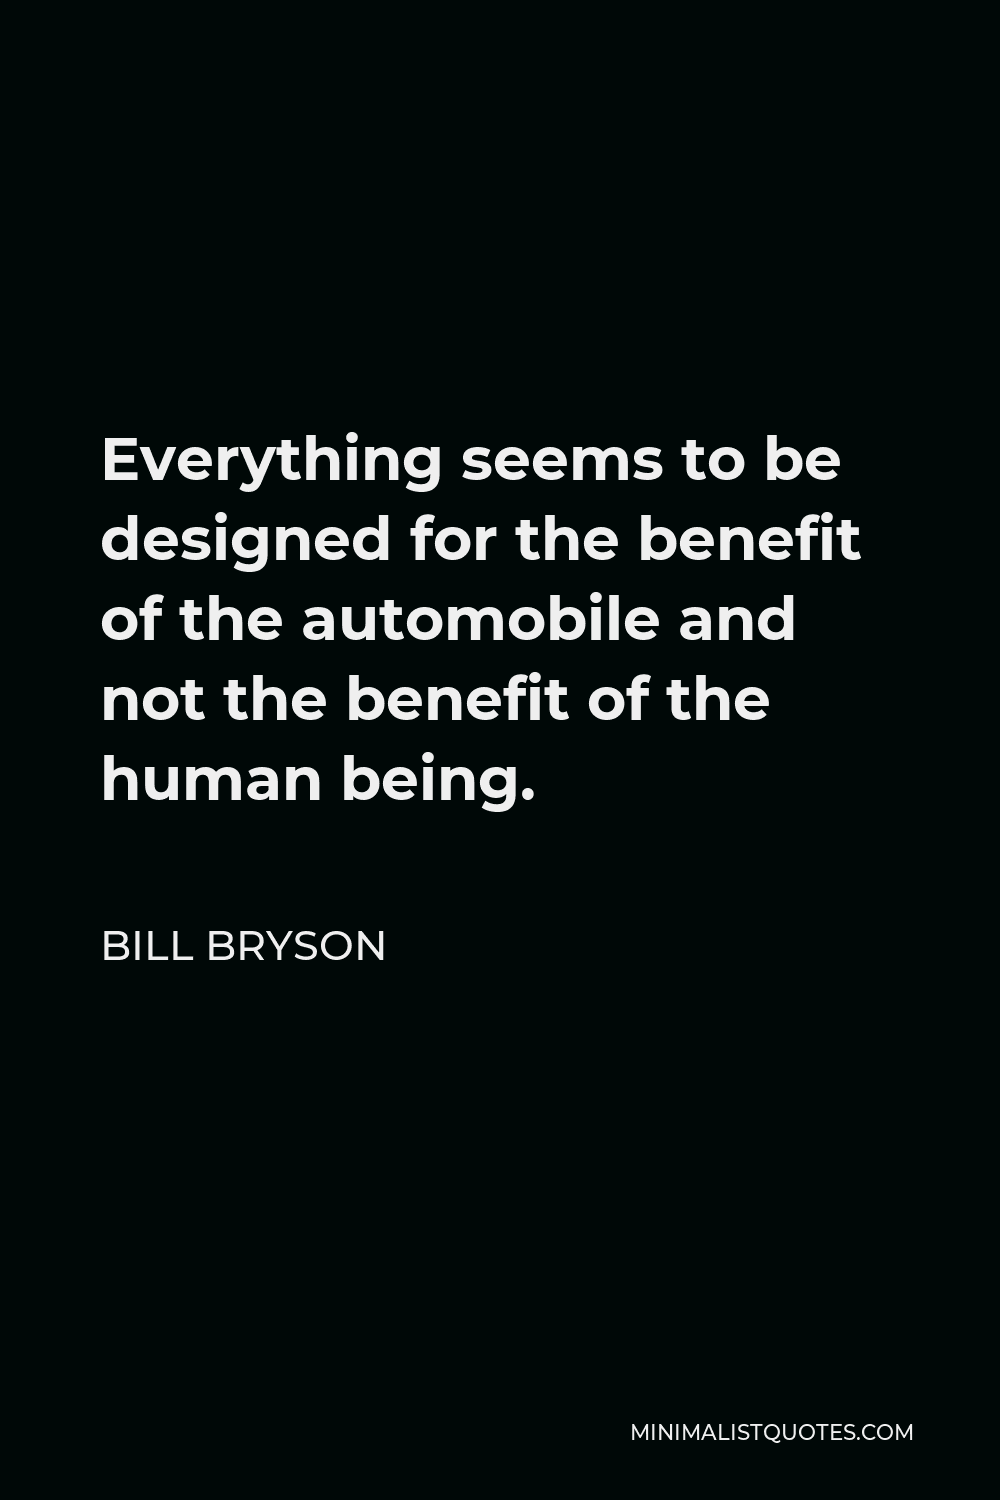 Bill Bryson Quote - Everything seems to be designed for the benefit of the automobile and not the benefit of the human being.